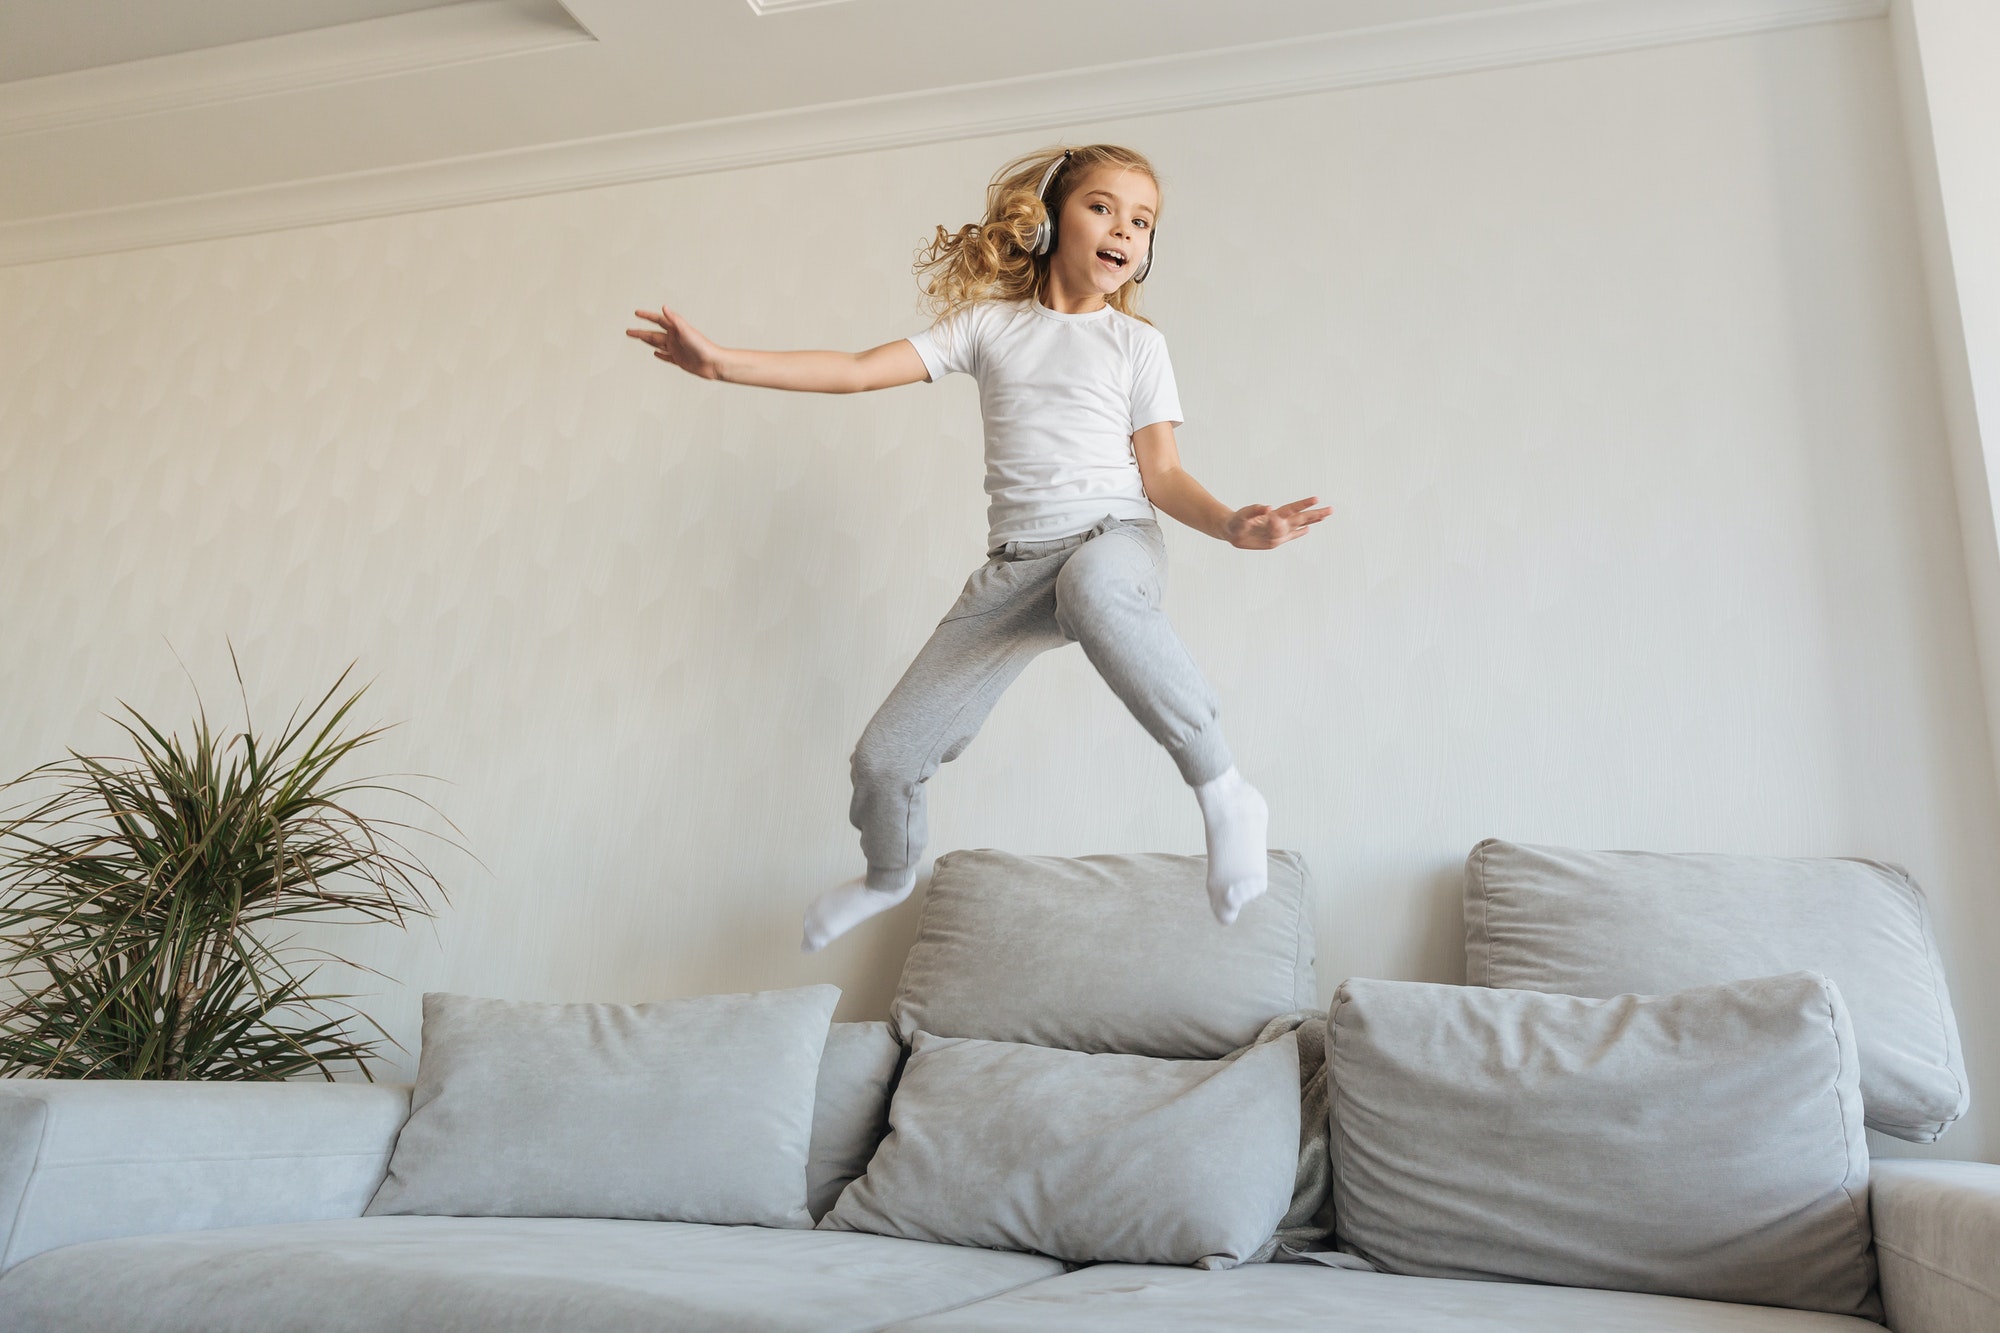 smiling kid jumping on sofa and listening music with headphones